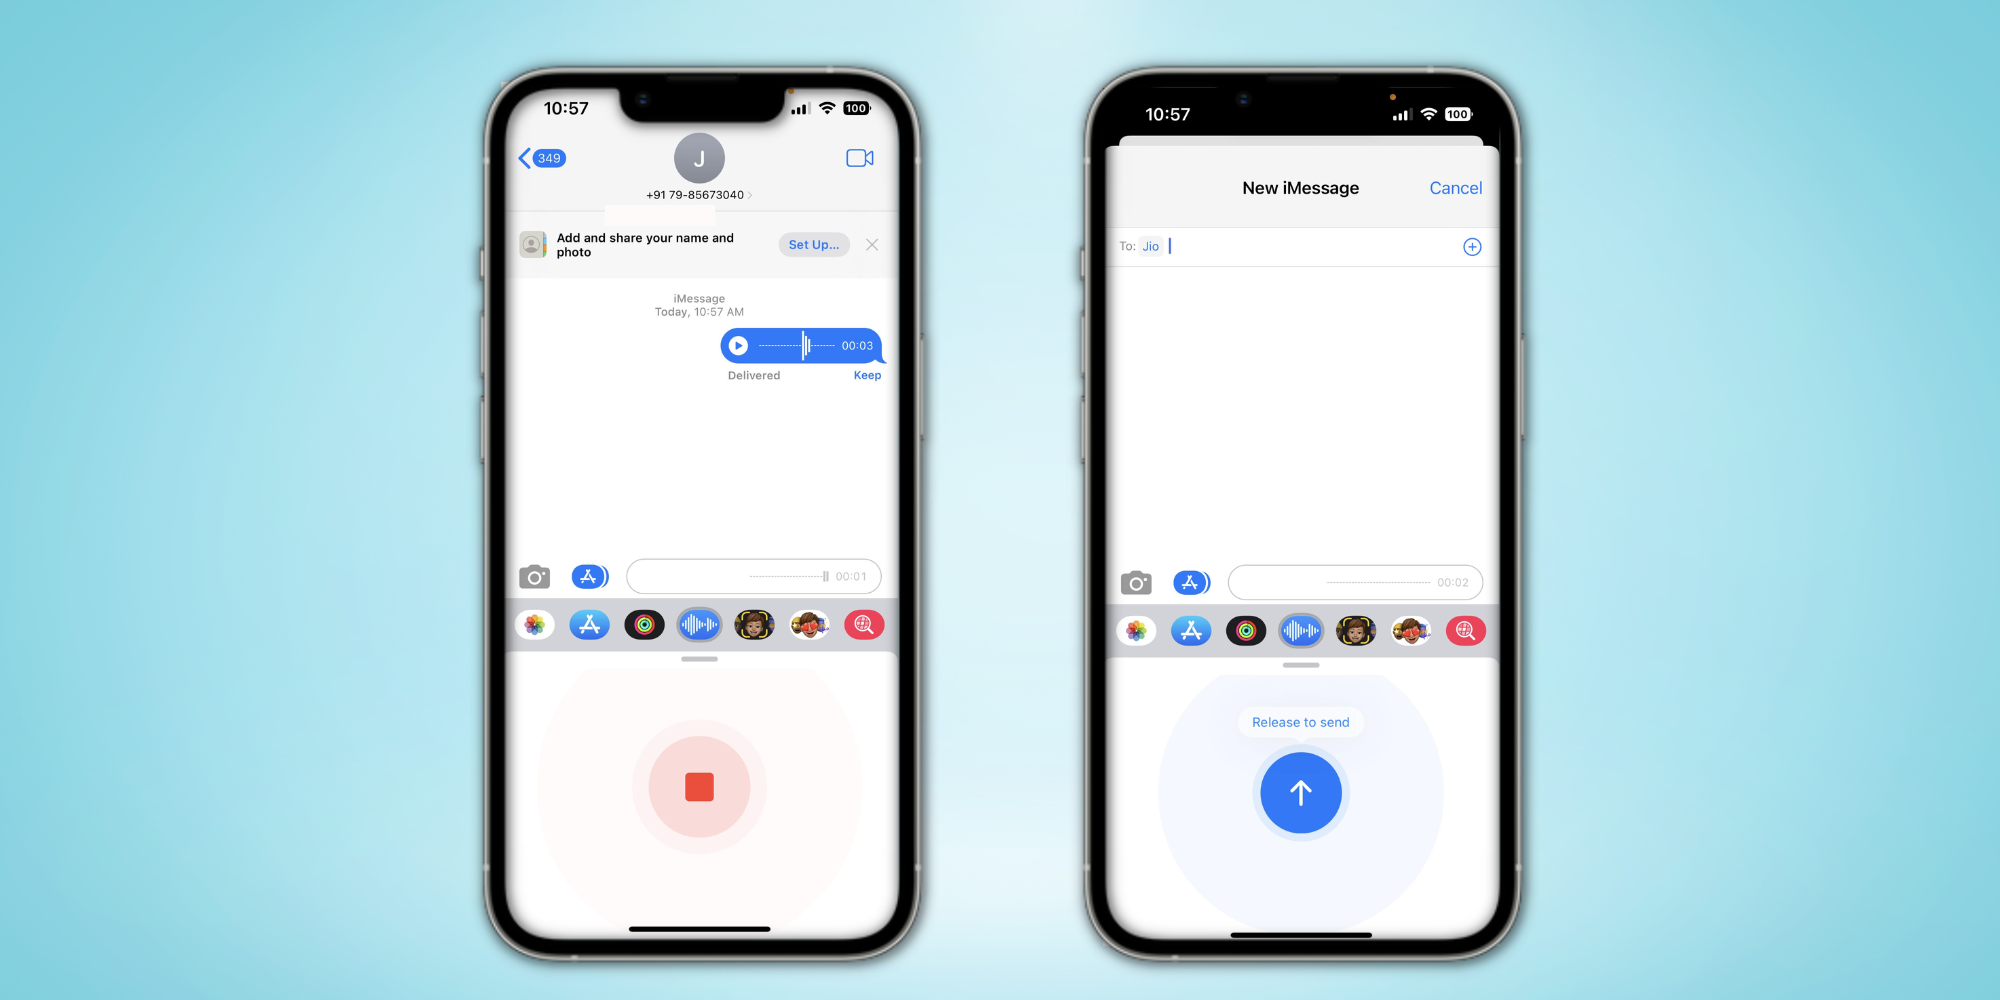 How to record voice messages on iPhone with iOS 16